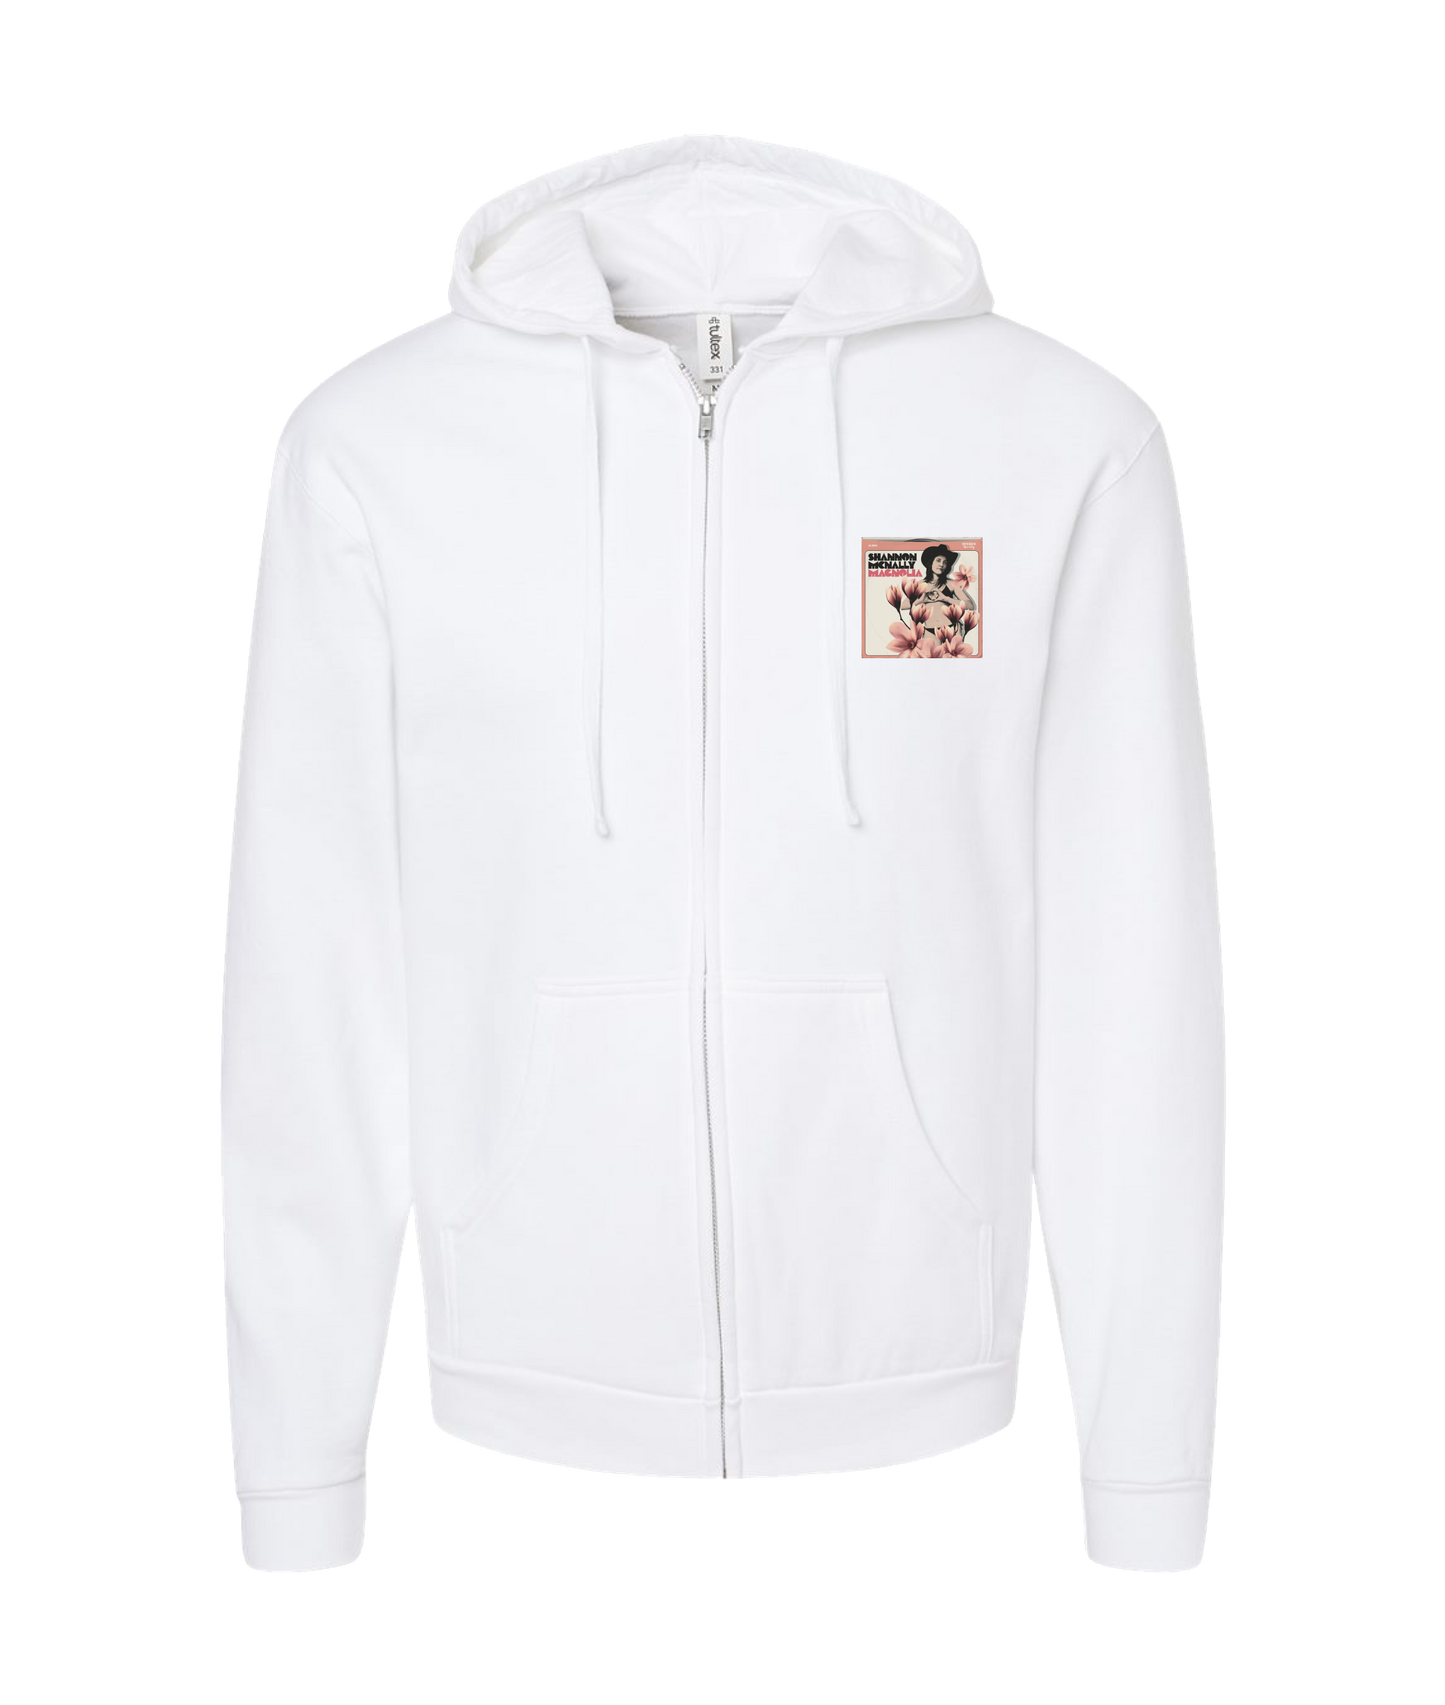 Shannon McNally - MAGNOLIA - White Zip Up Hoodie